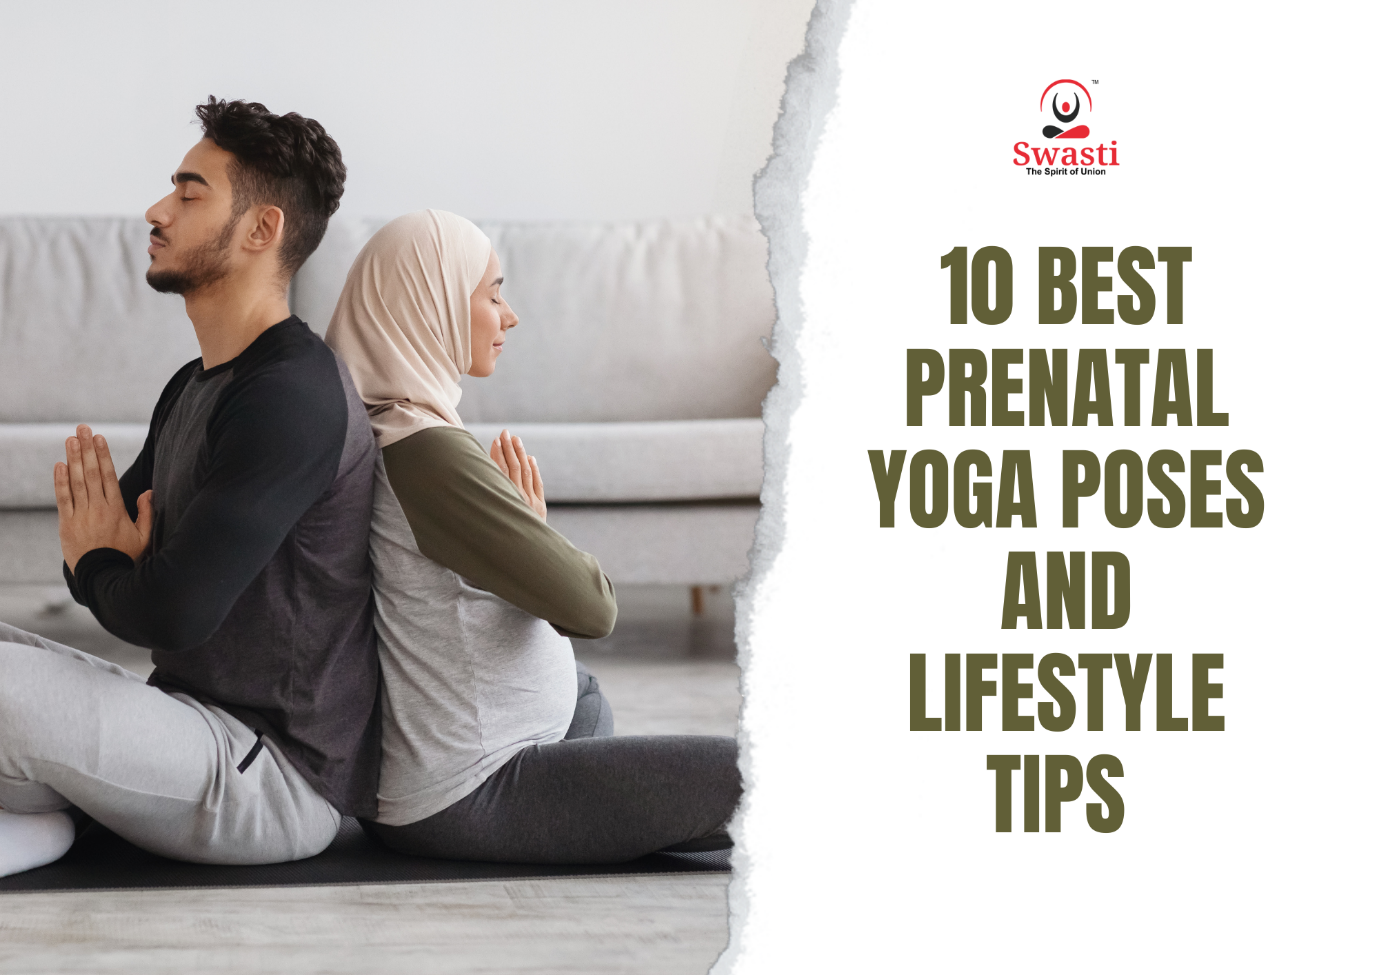 10 Best Prenatal Yoga Poses and Lifestyle Tips for Pregnant Women